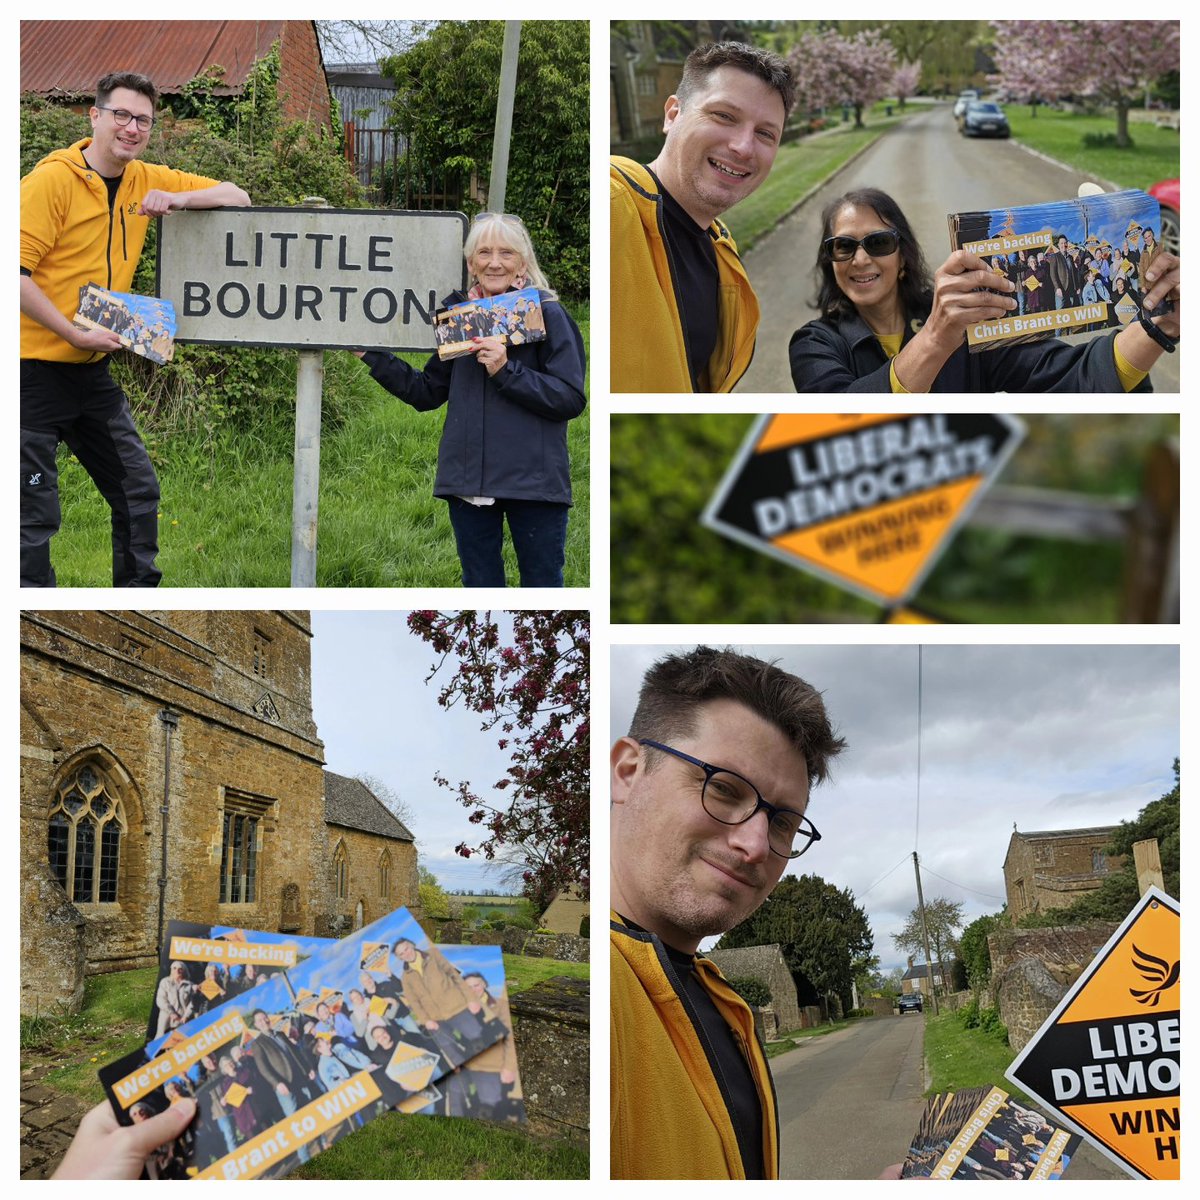 A brilliant reception in #Horley #Hornton and #LittleBourton today!